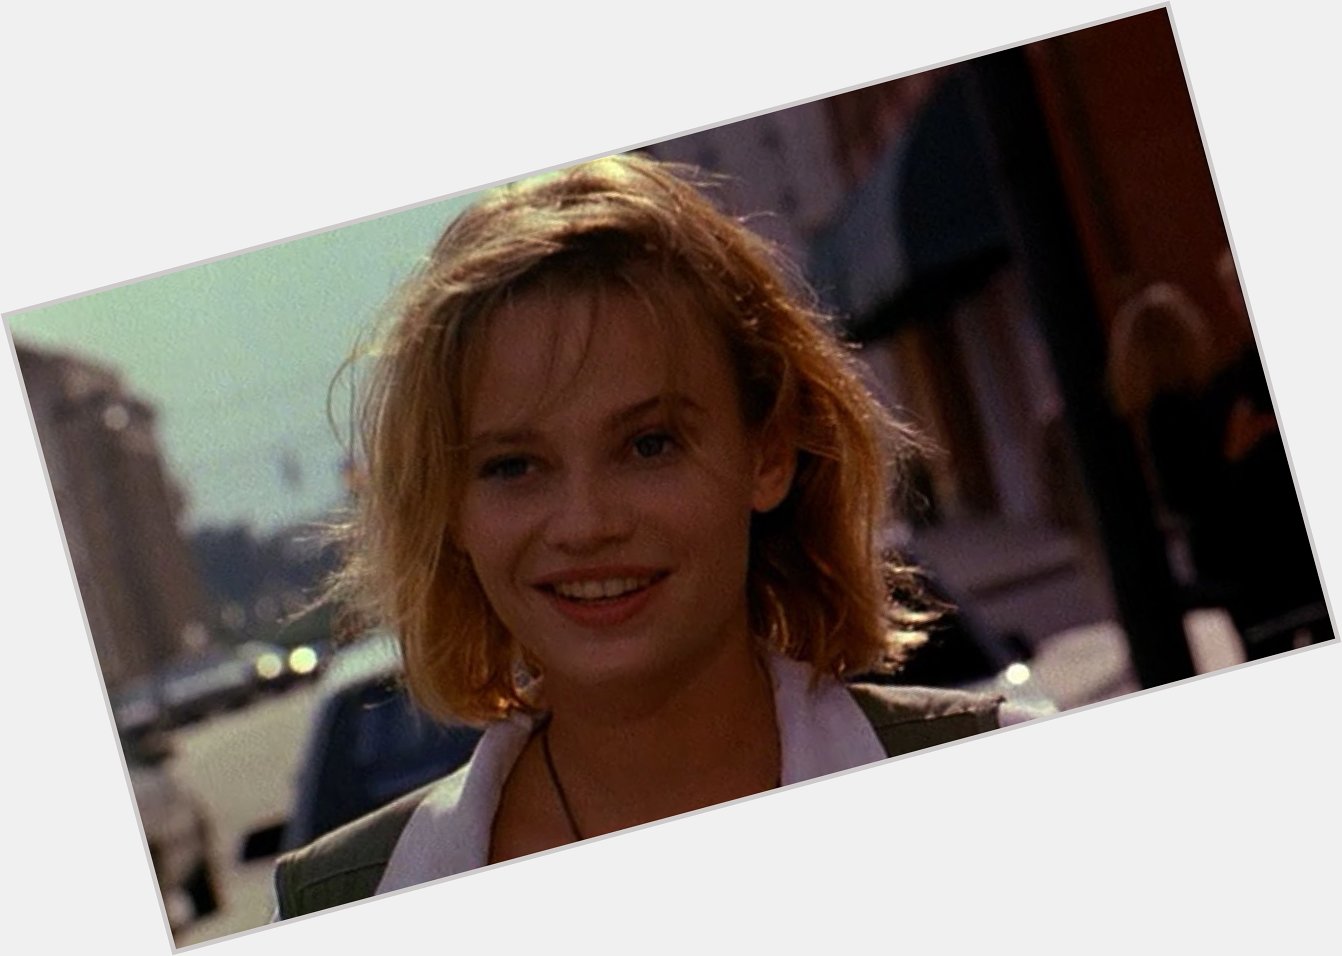 Happy Birthday Samantha Mathis, one of my early-to-mid 90s crushes 